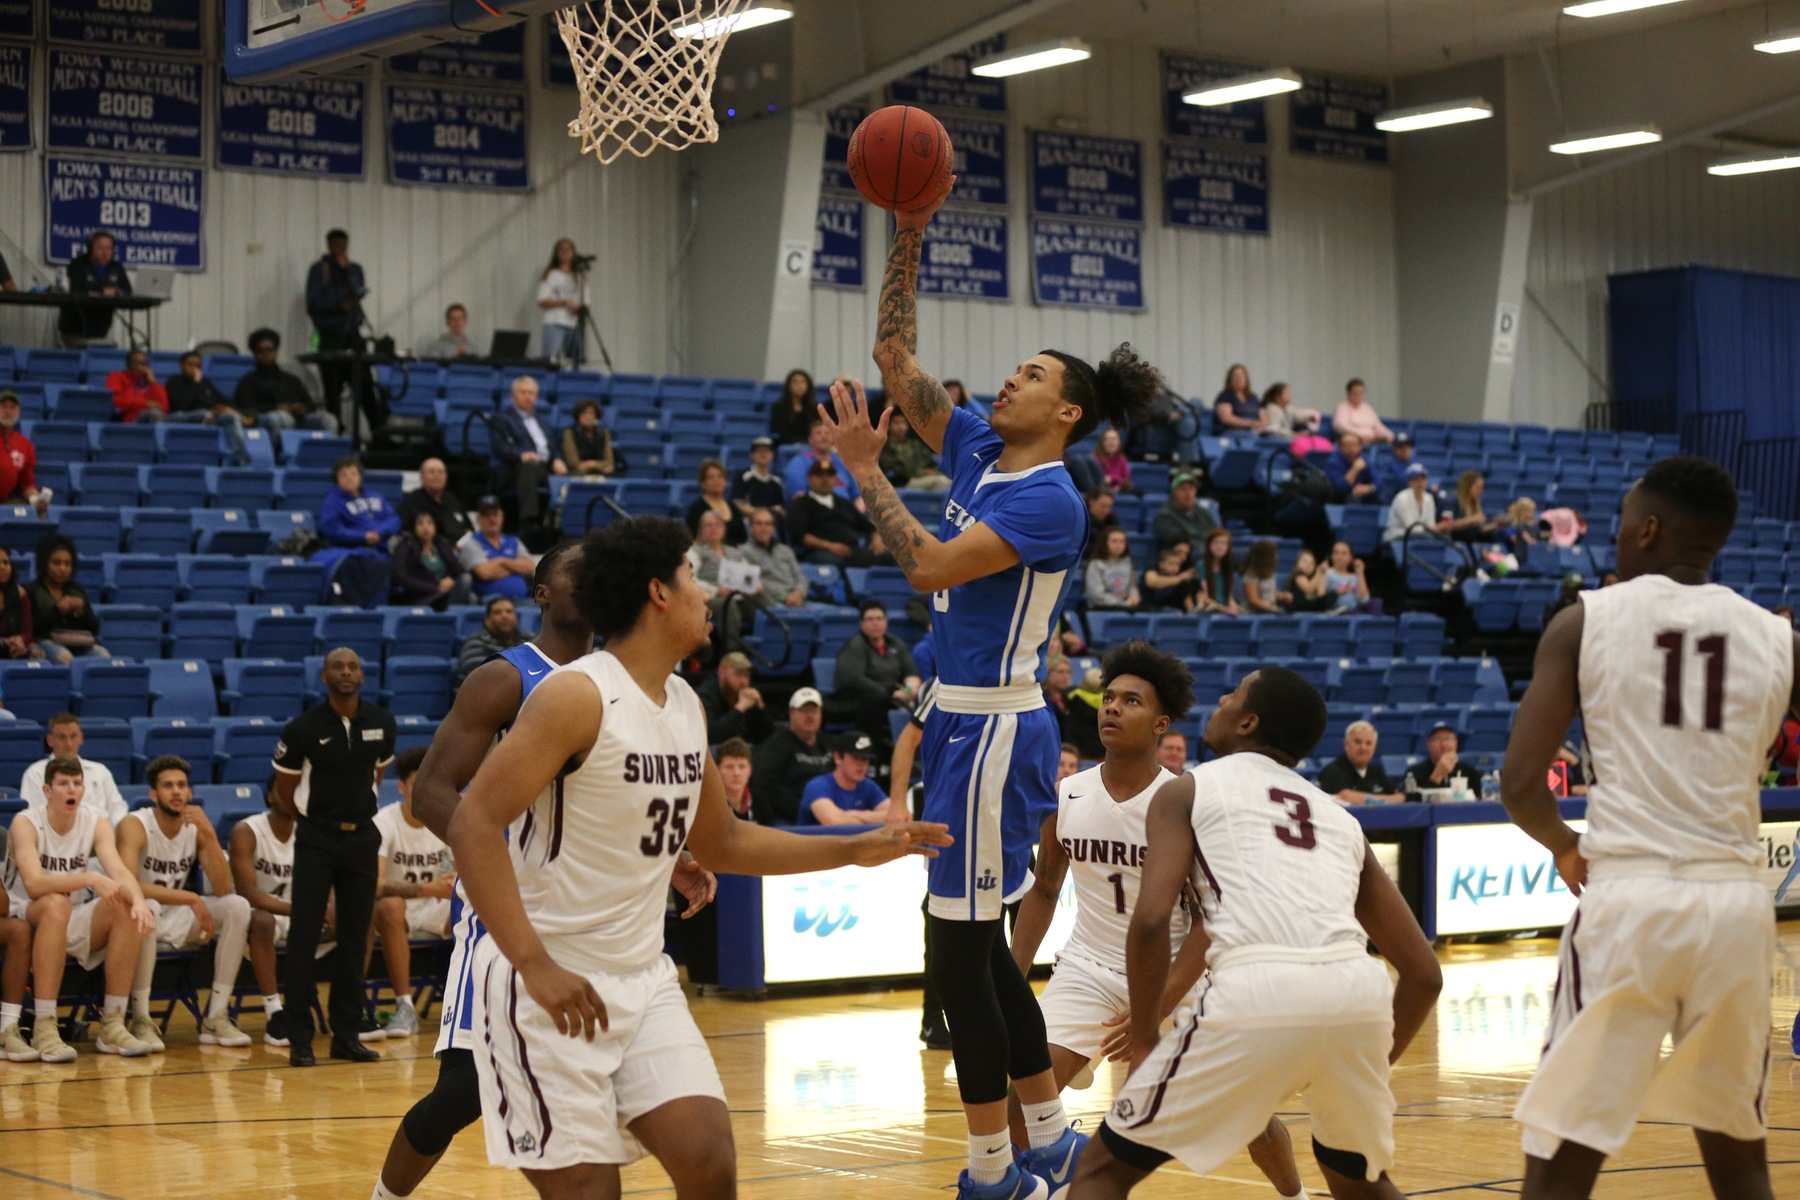 Isaiah Wade's tenth "double-double" of the season helped #17 Iowa Western to an impressive 108-87 road conference victory over the Northeast Hawks in Norfolk, NE.